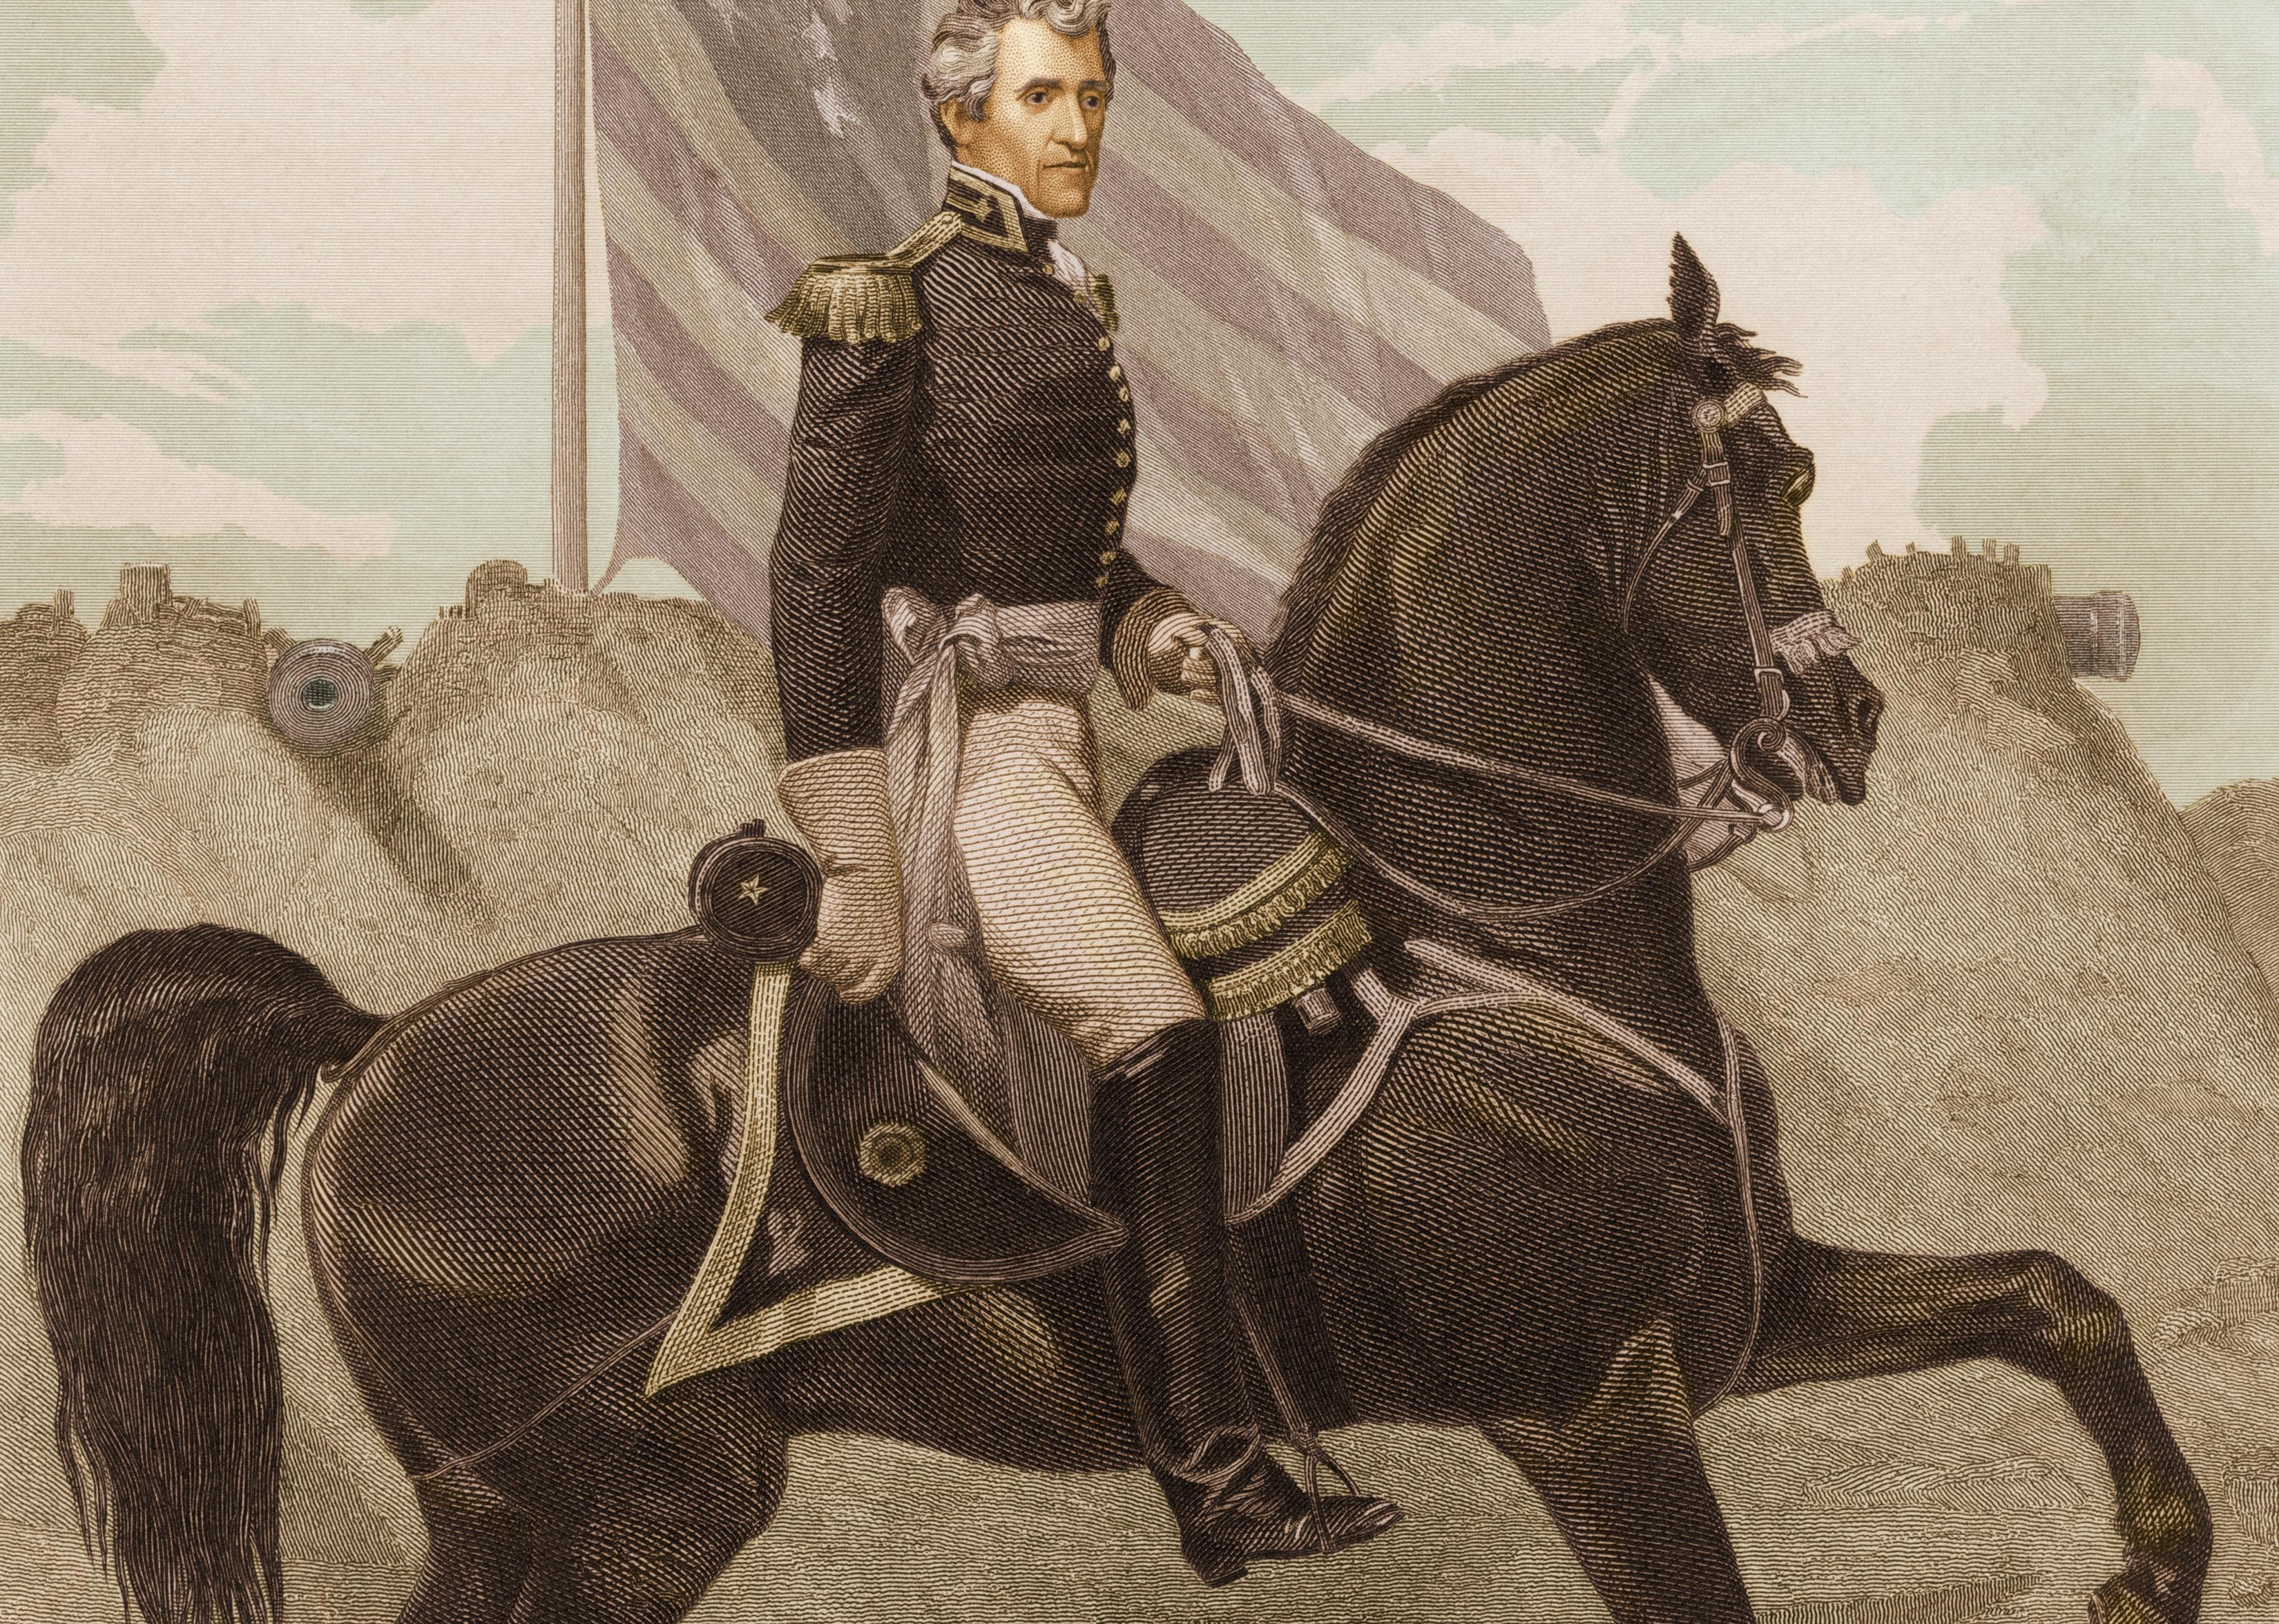 An illustration of Andrew Jackson on horseback in front of an American flag.